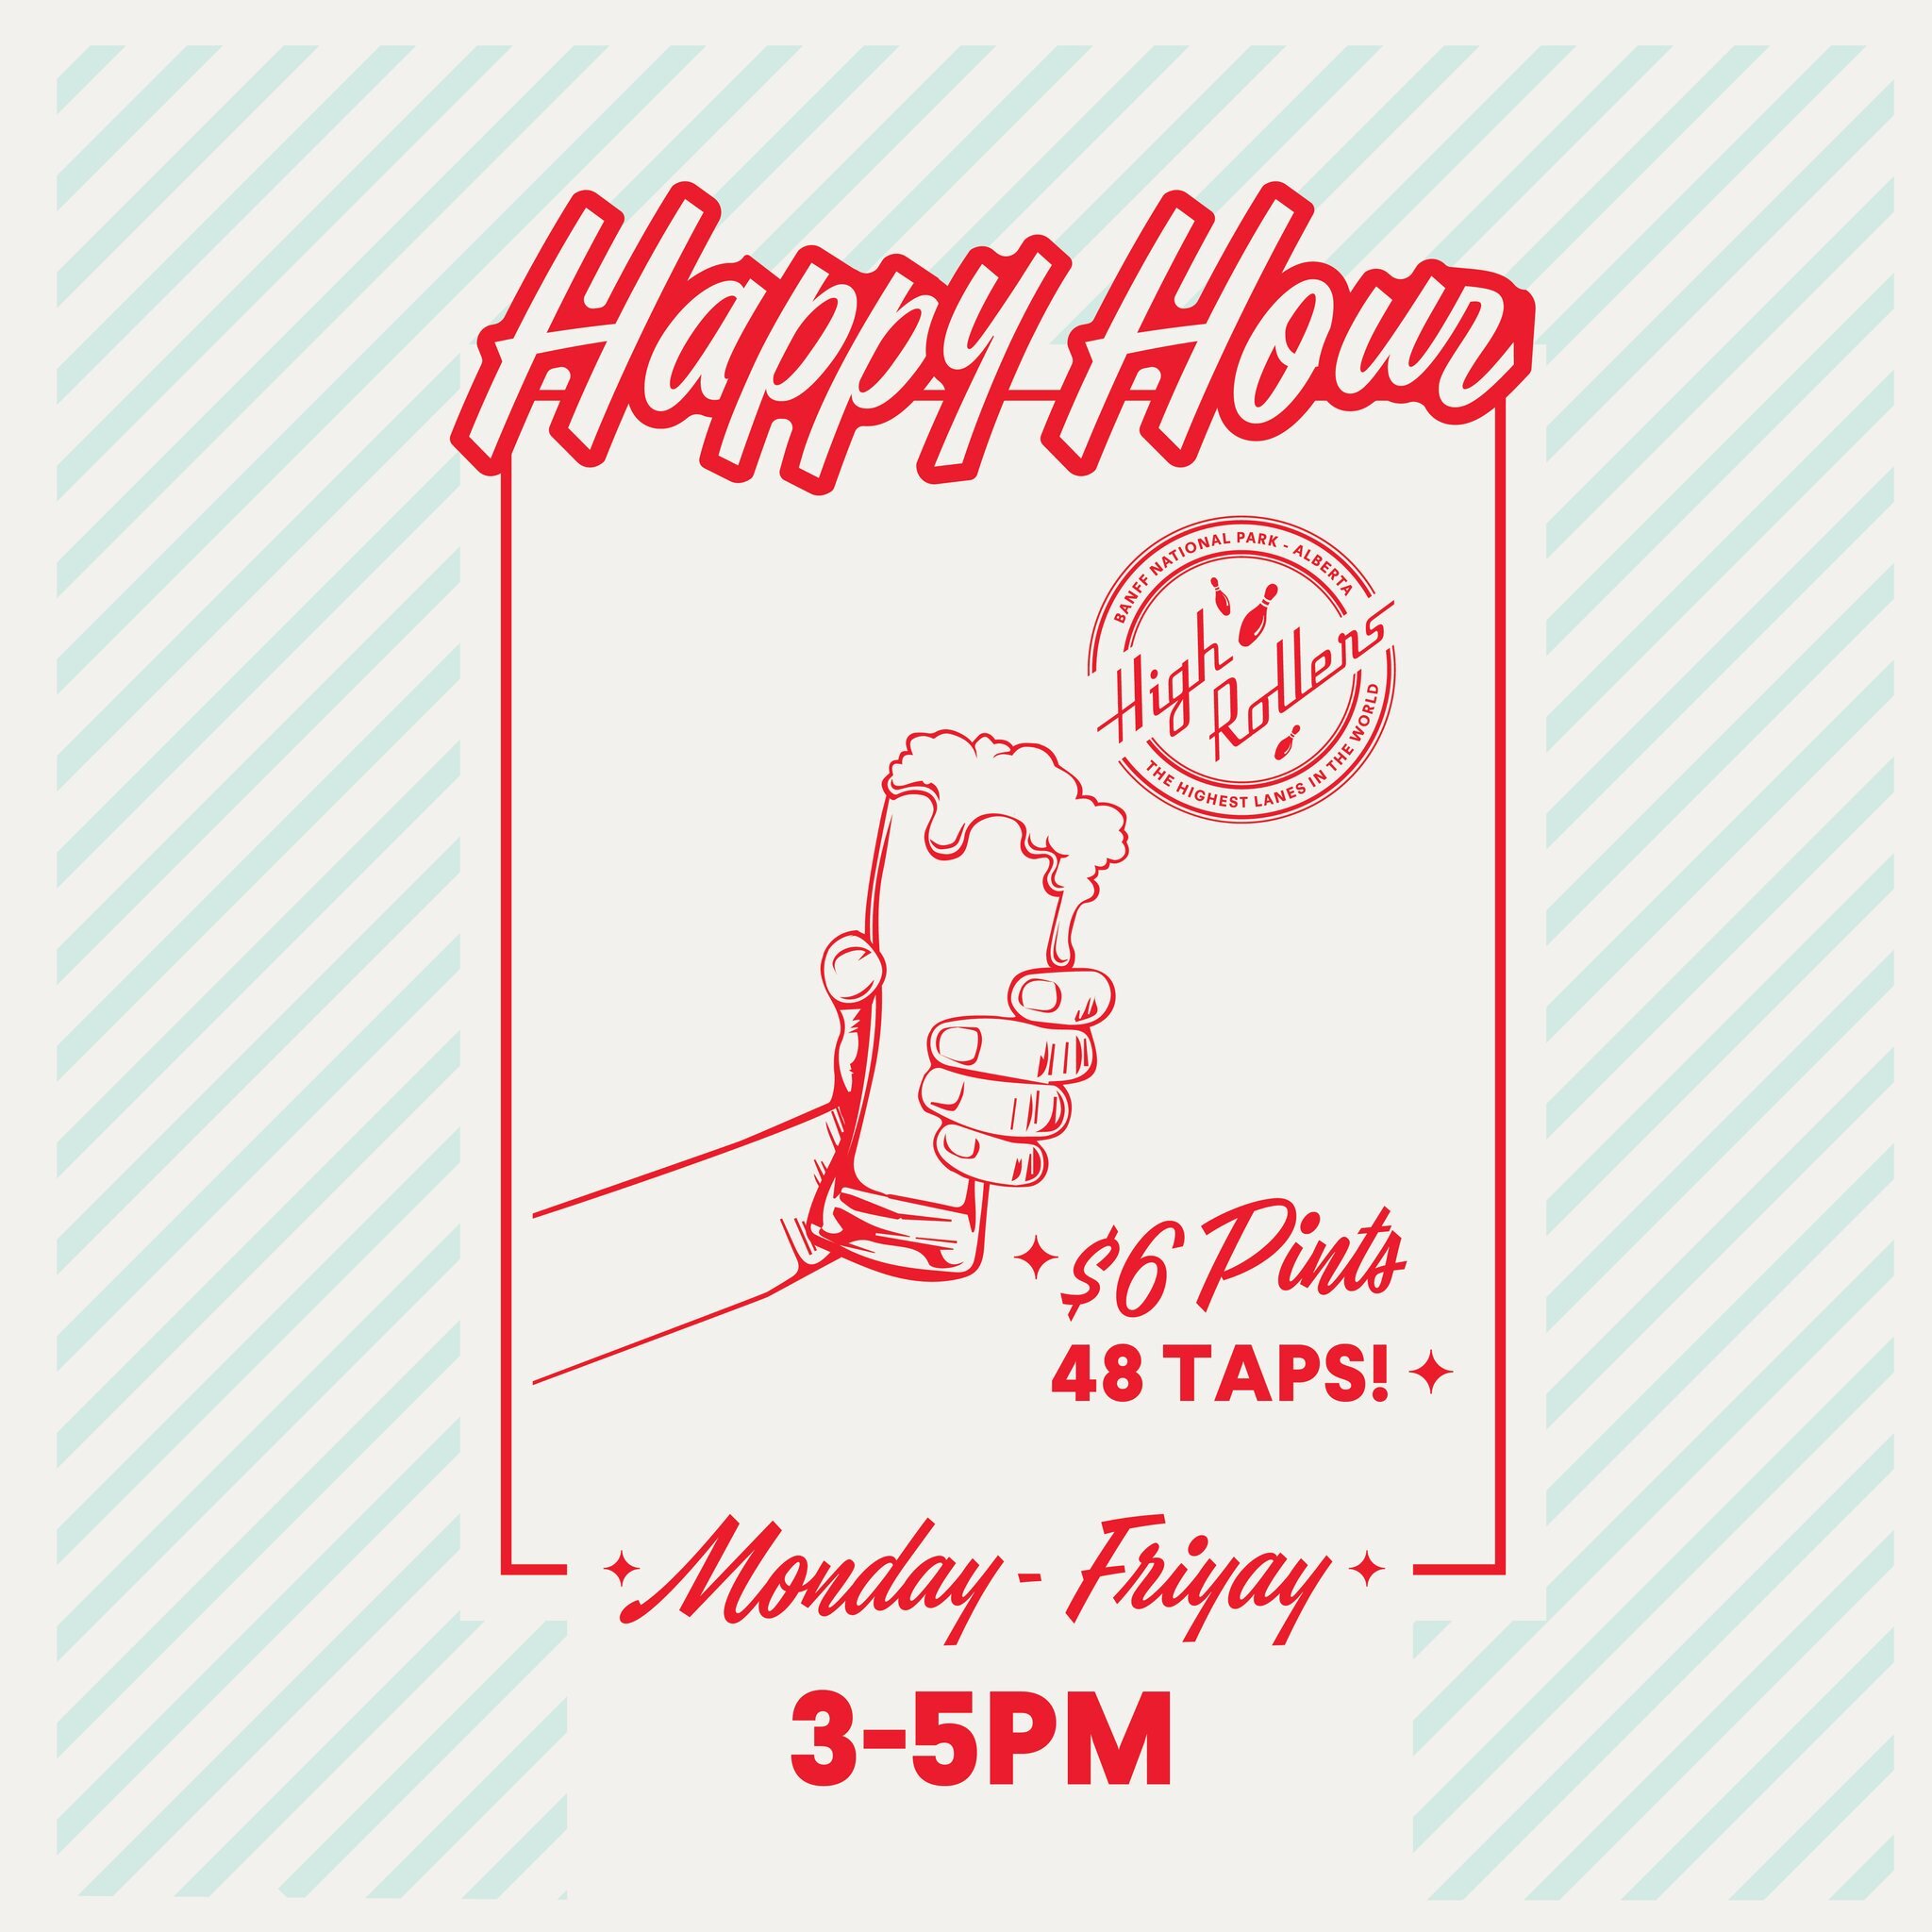 $6 Pints, $10 Pizza (cheese, pepperoni, marg or Hawaiian) and $10 Wings.😱 Now we're talkin'. Let the good times ROLL at happy hour. Monday - Friyay from 3-5pm. Reserve your table now! Link in bio.